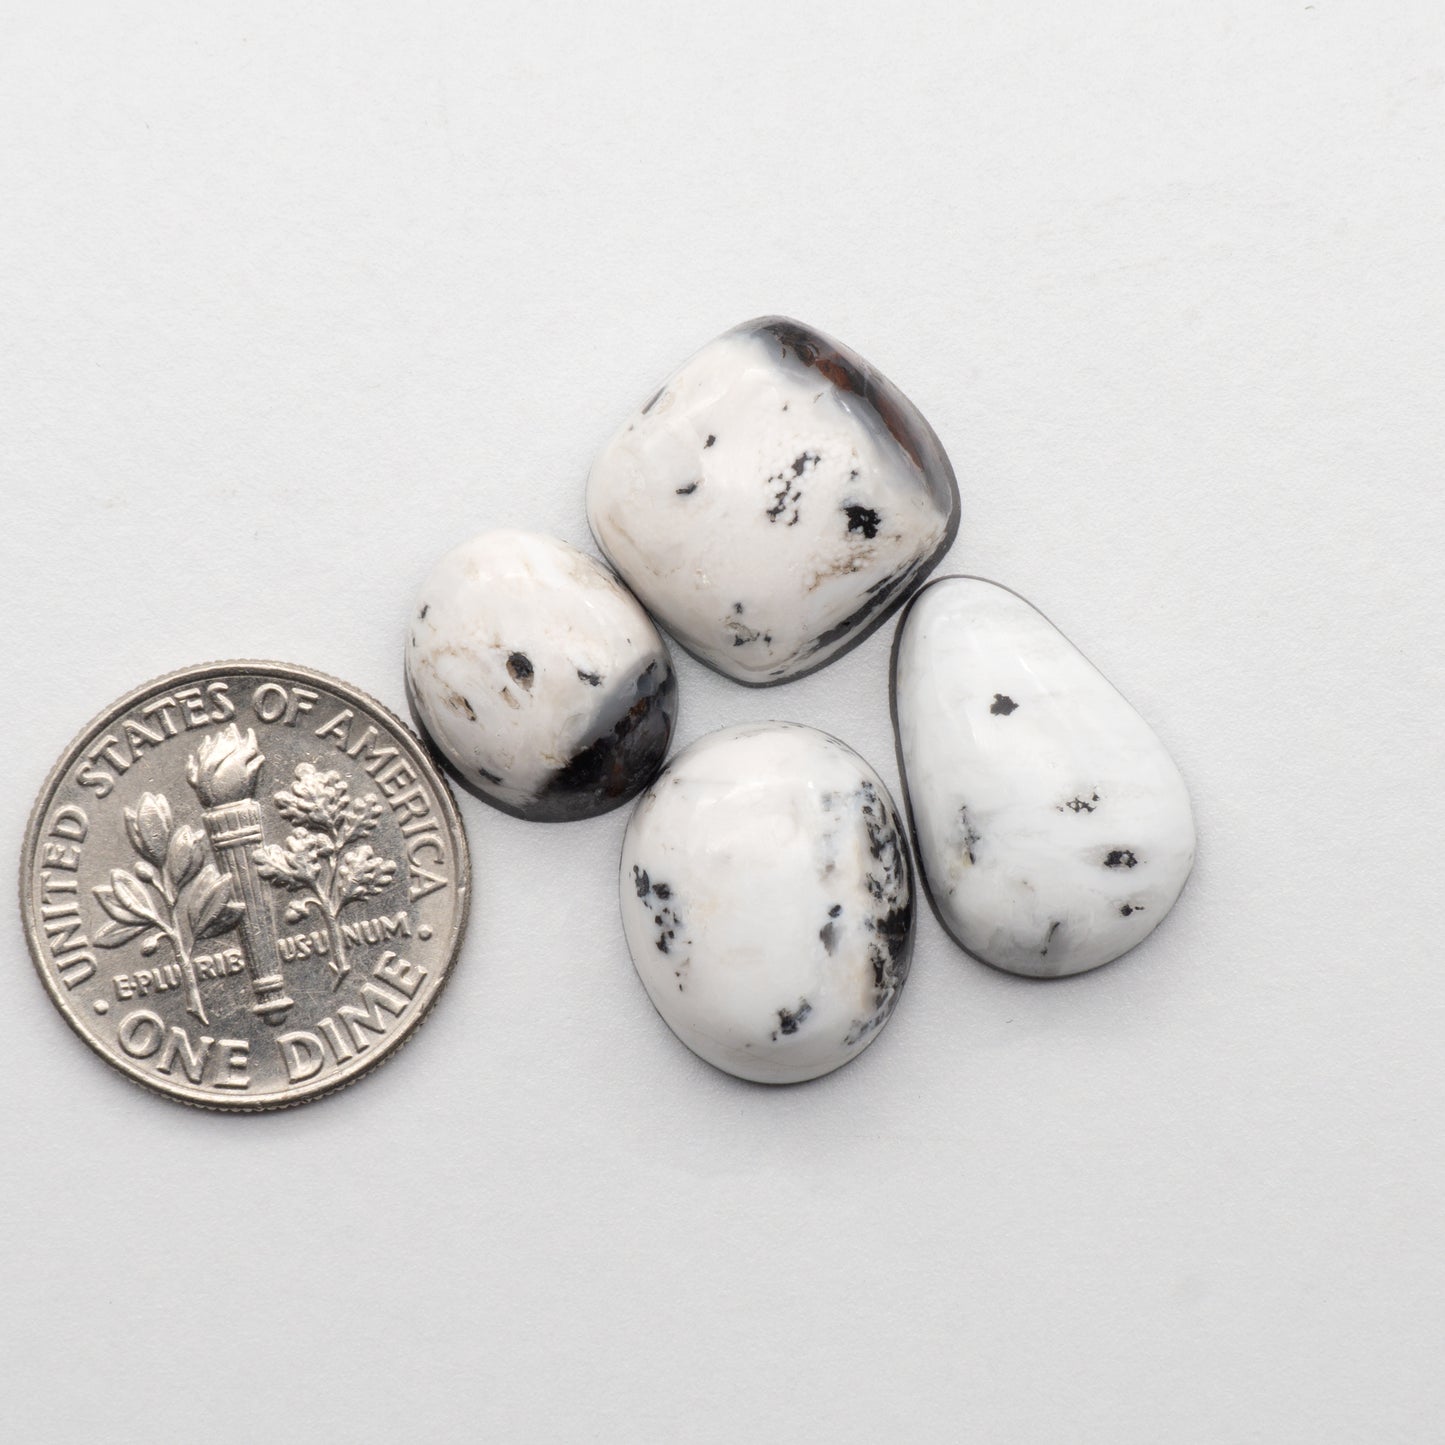 White Buffalo Stone Cabochons are semi-precious gemstones cut into shapes ideal for jewelry-making and crafting. The unique and varied veining of each cabochon lend an unparalleled depth and detail to any project, making them an excellent choice for artisans looking to add an individualistic touch.